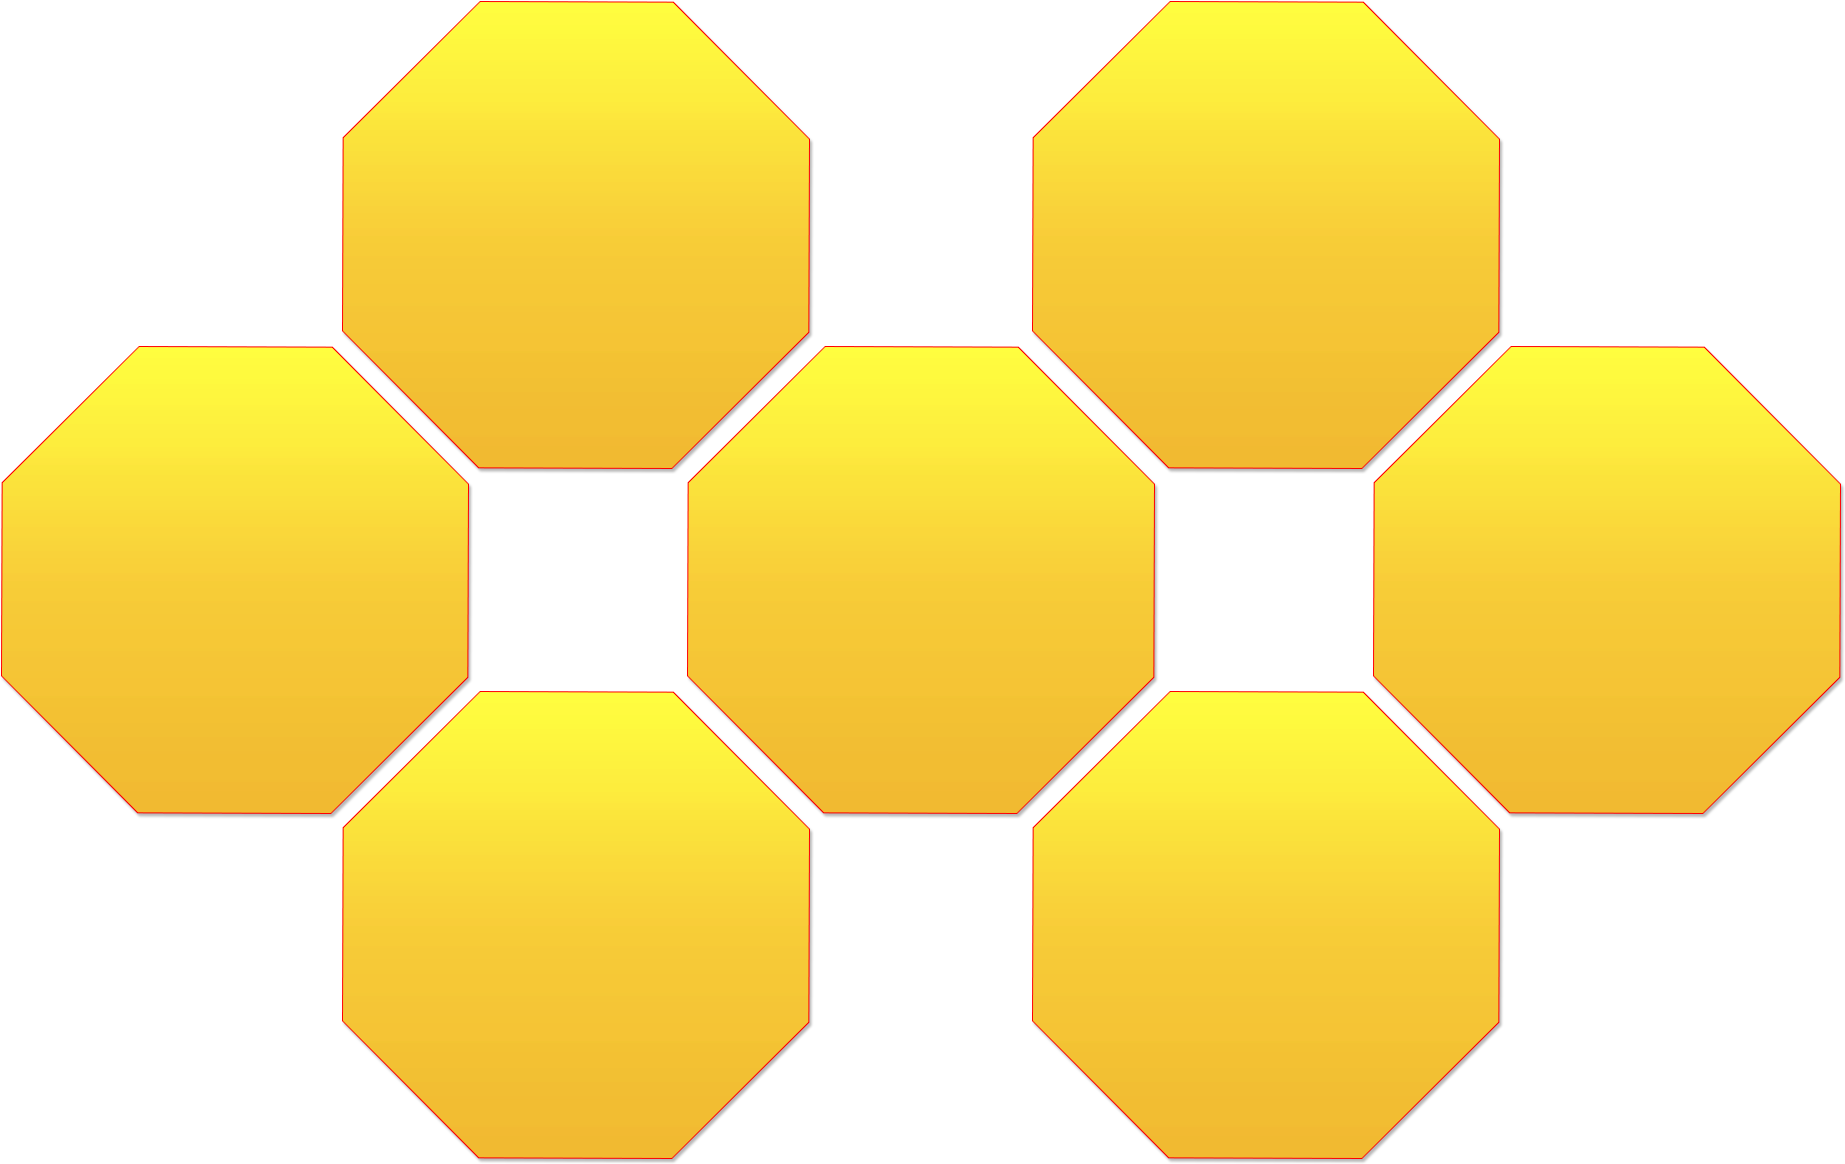 Download Pattern Honeycomb PNG File HD HQ PNG Image